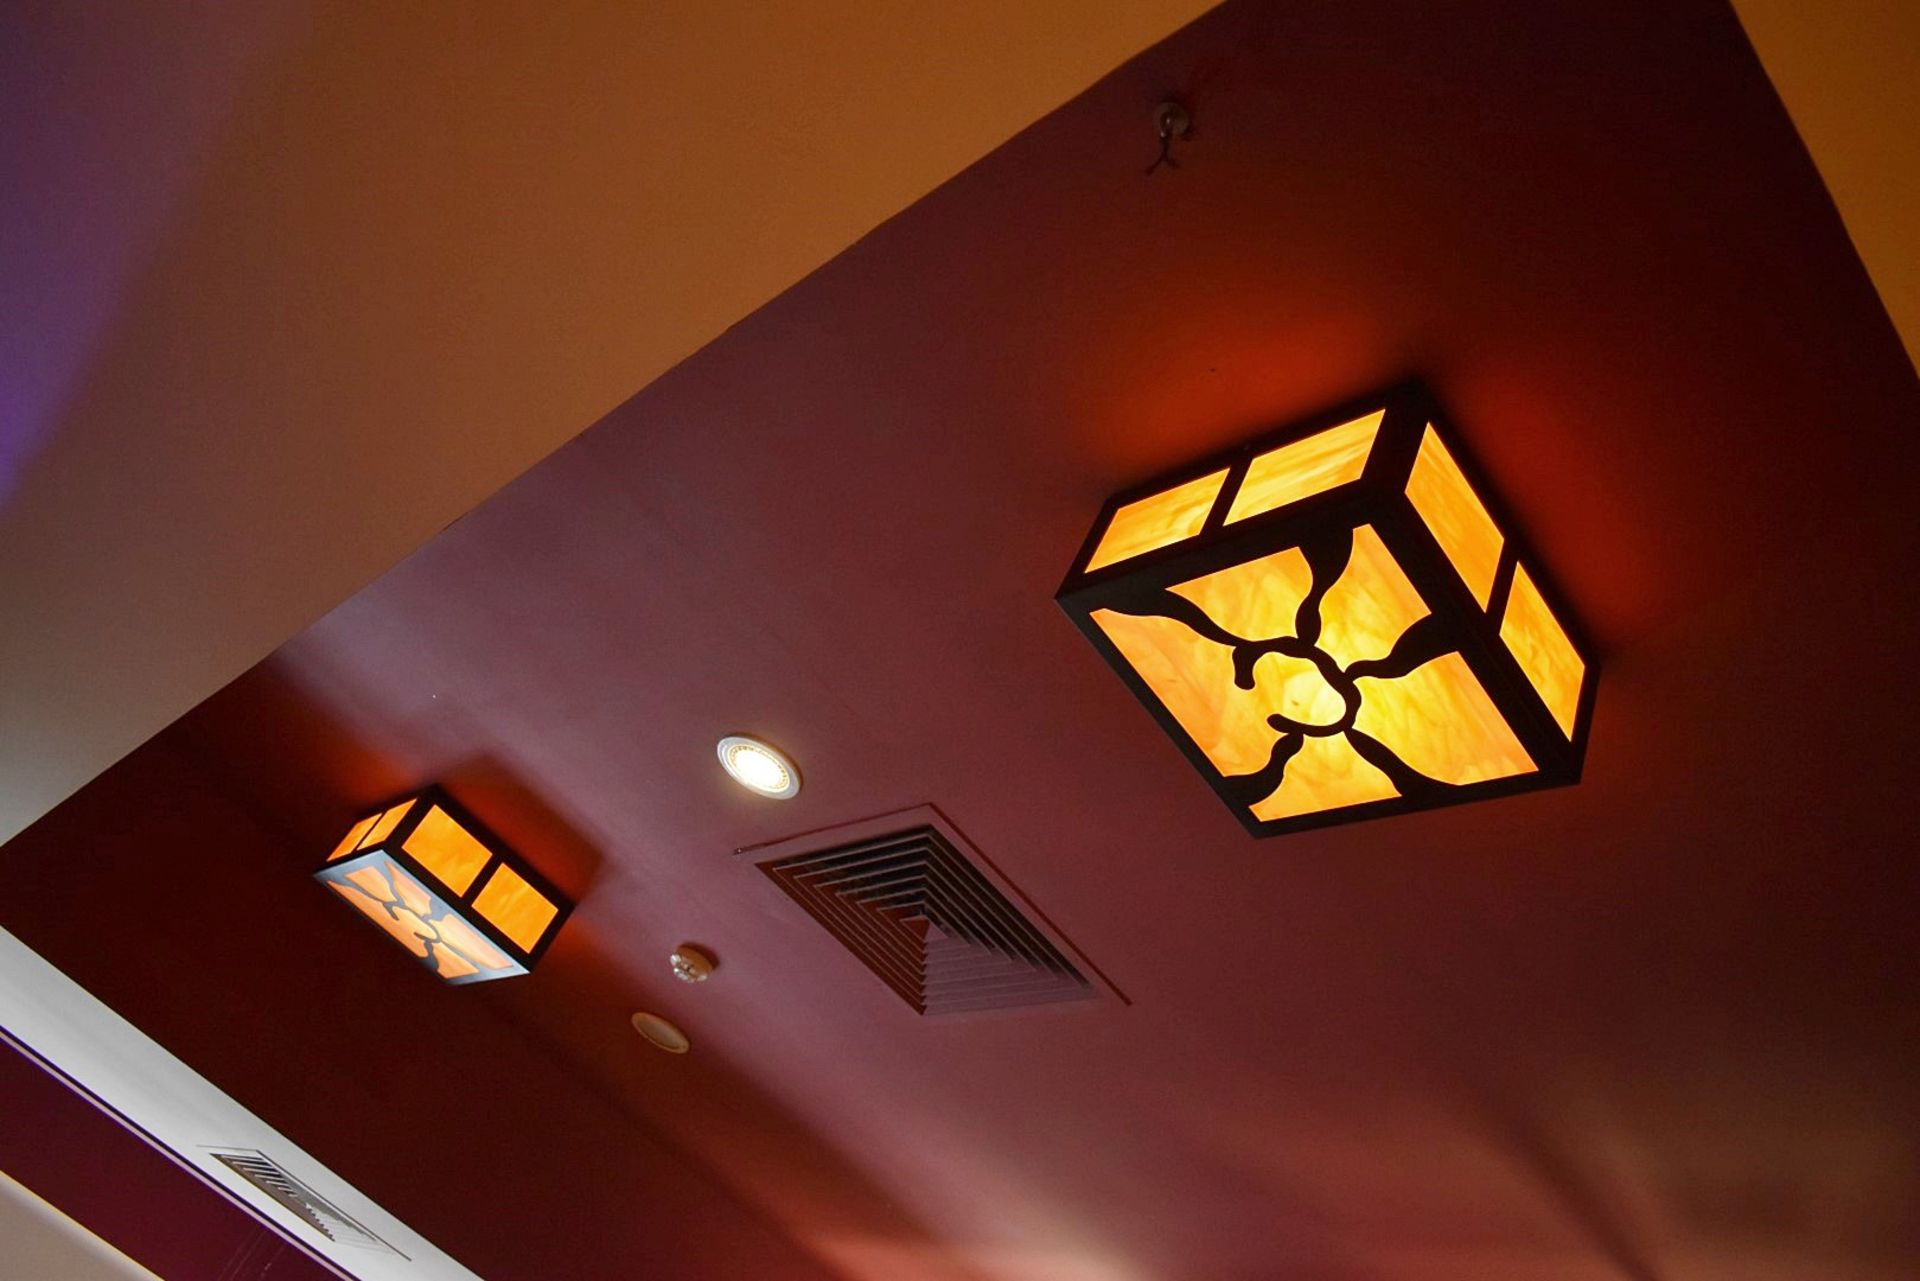 4 x Large Square Ceiling Lights With Artisan Glass Shades - Image 3 of 4